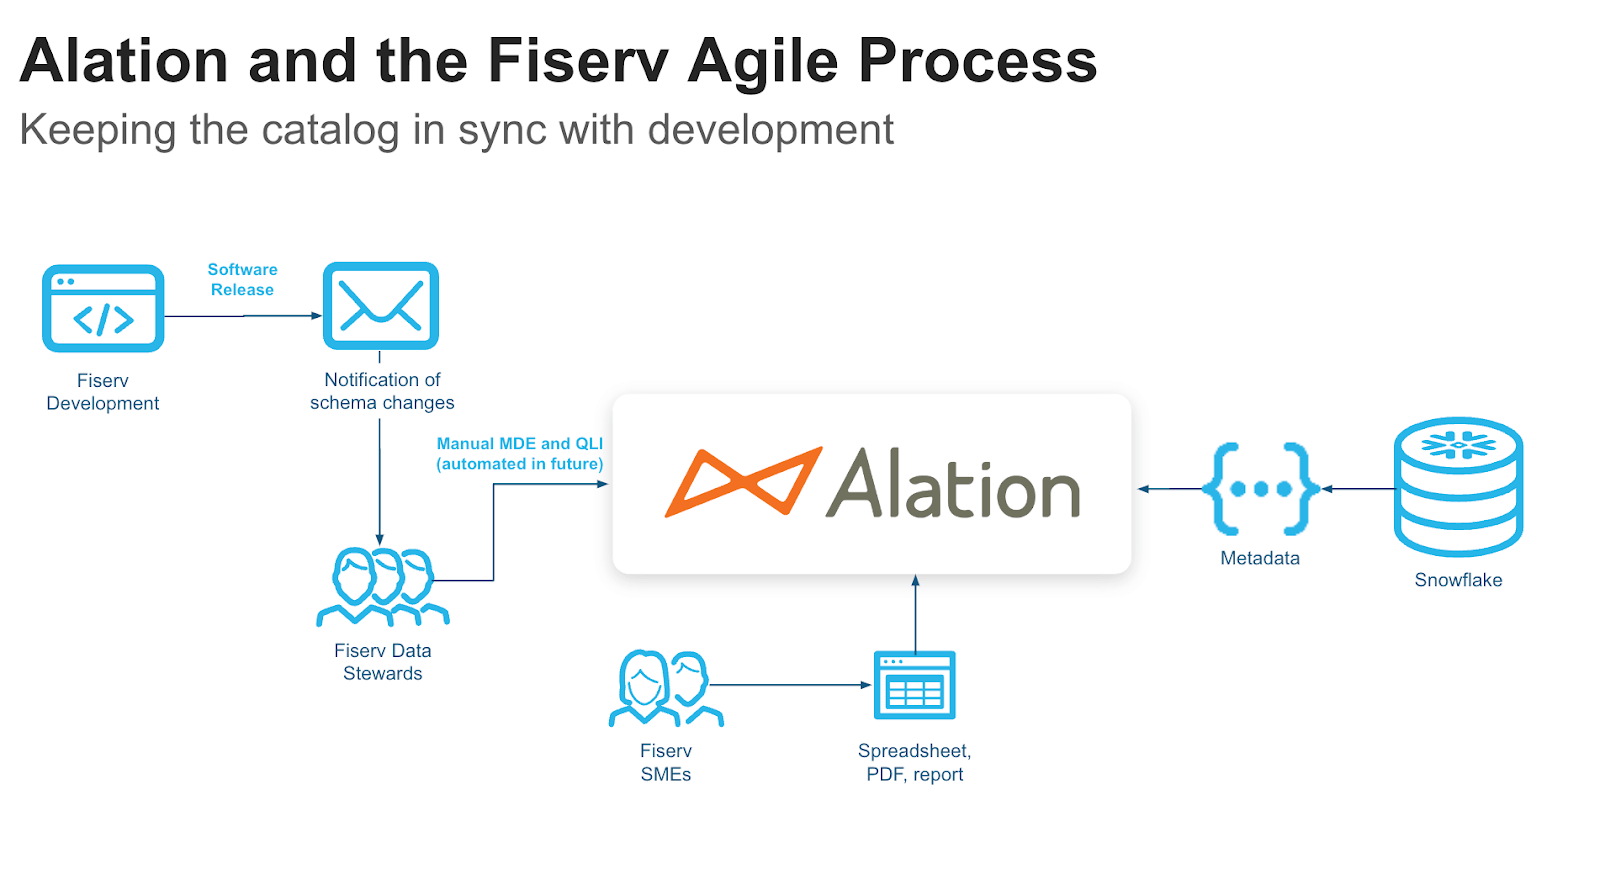 Slide showing Fiserv's agile process with Alation